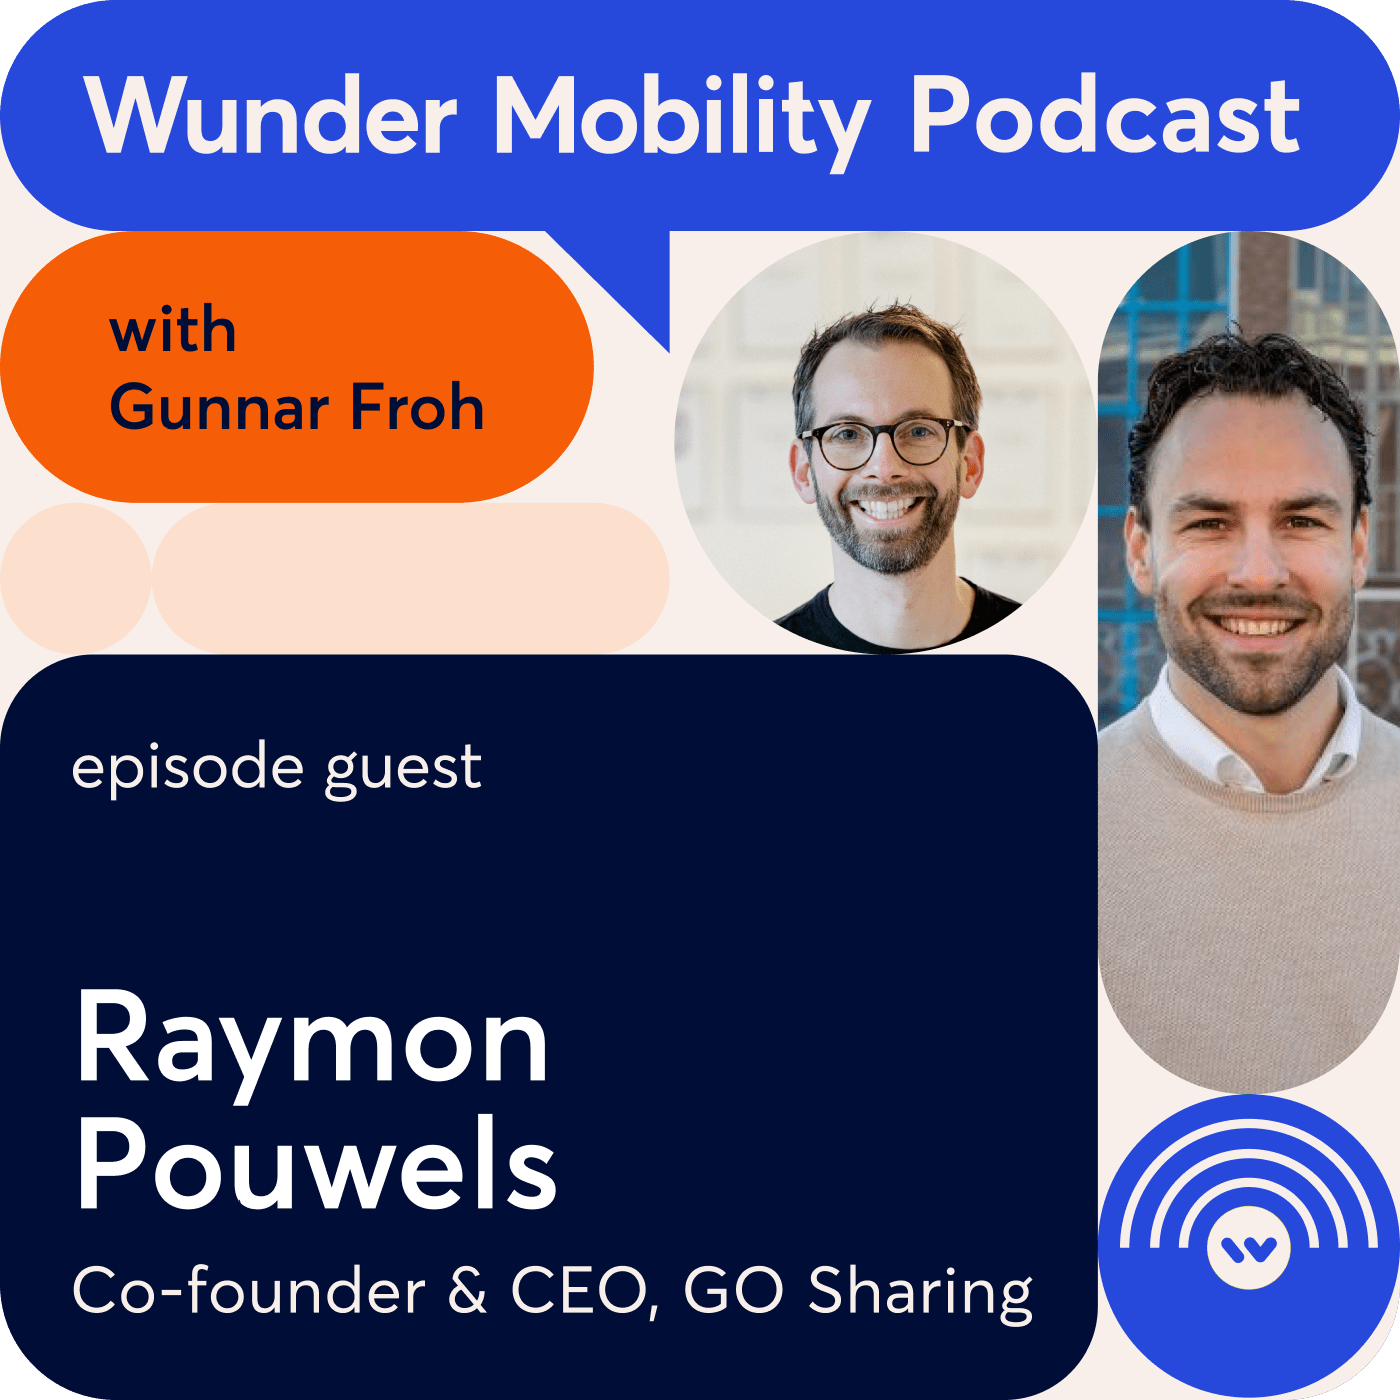 #33 Raymon Pouwels, Co-founder & CEO, GO Sharing